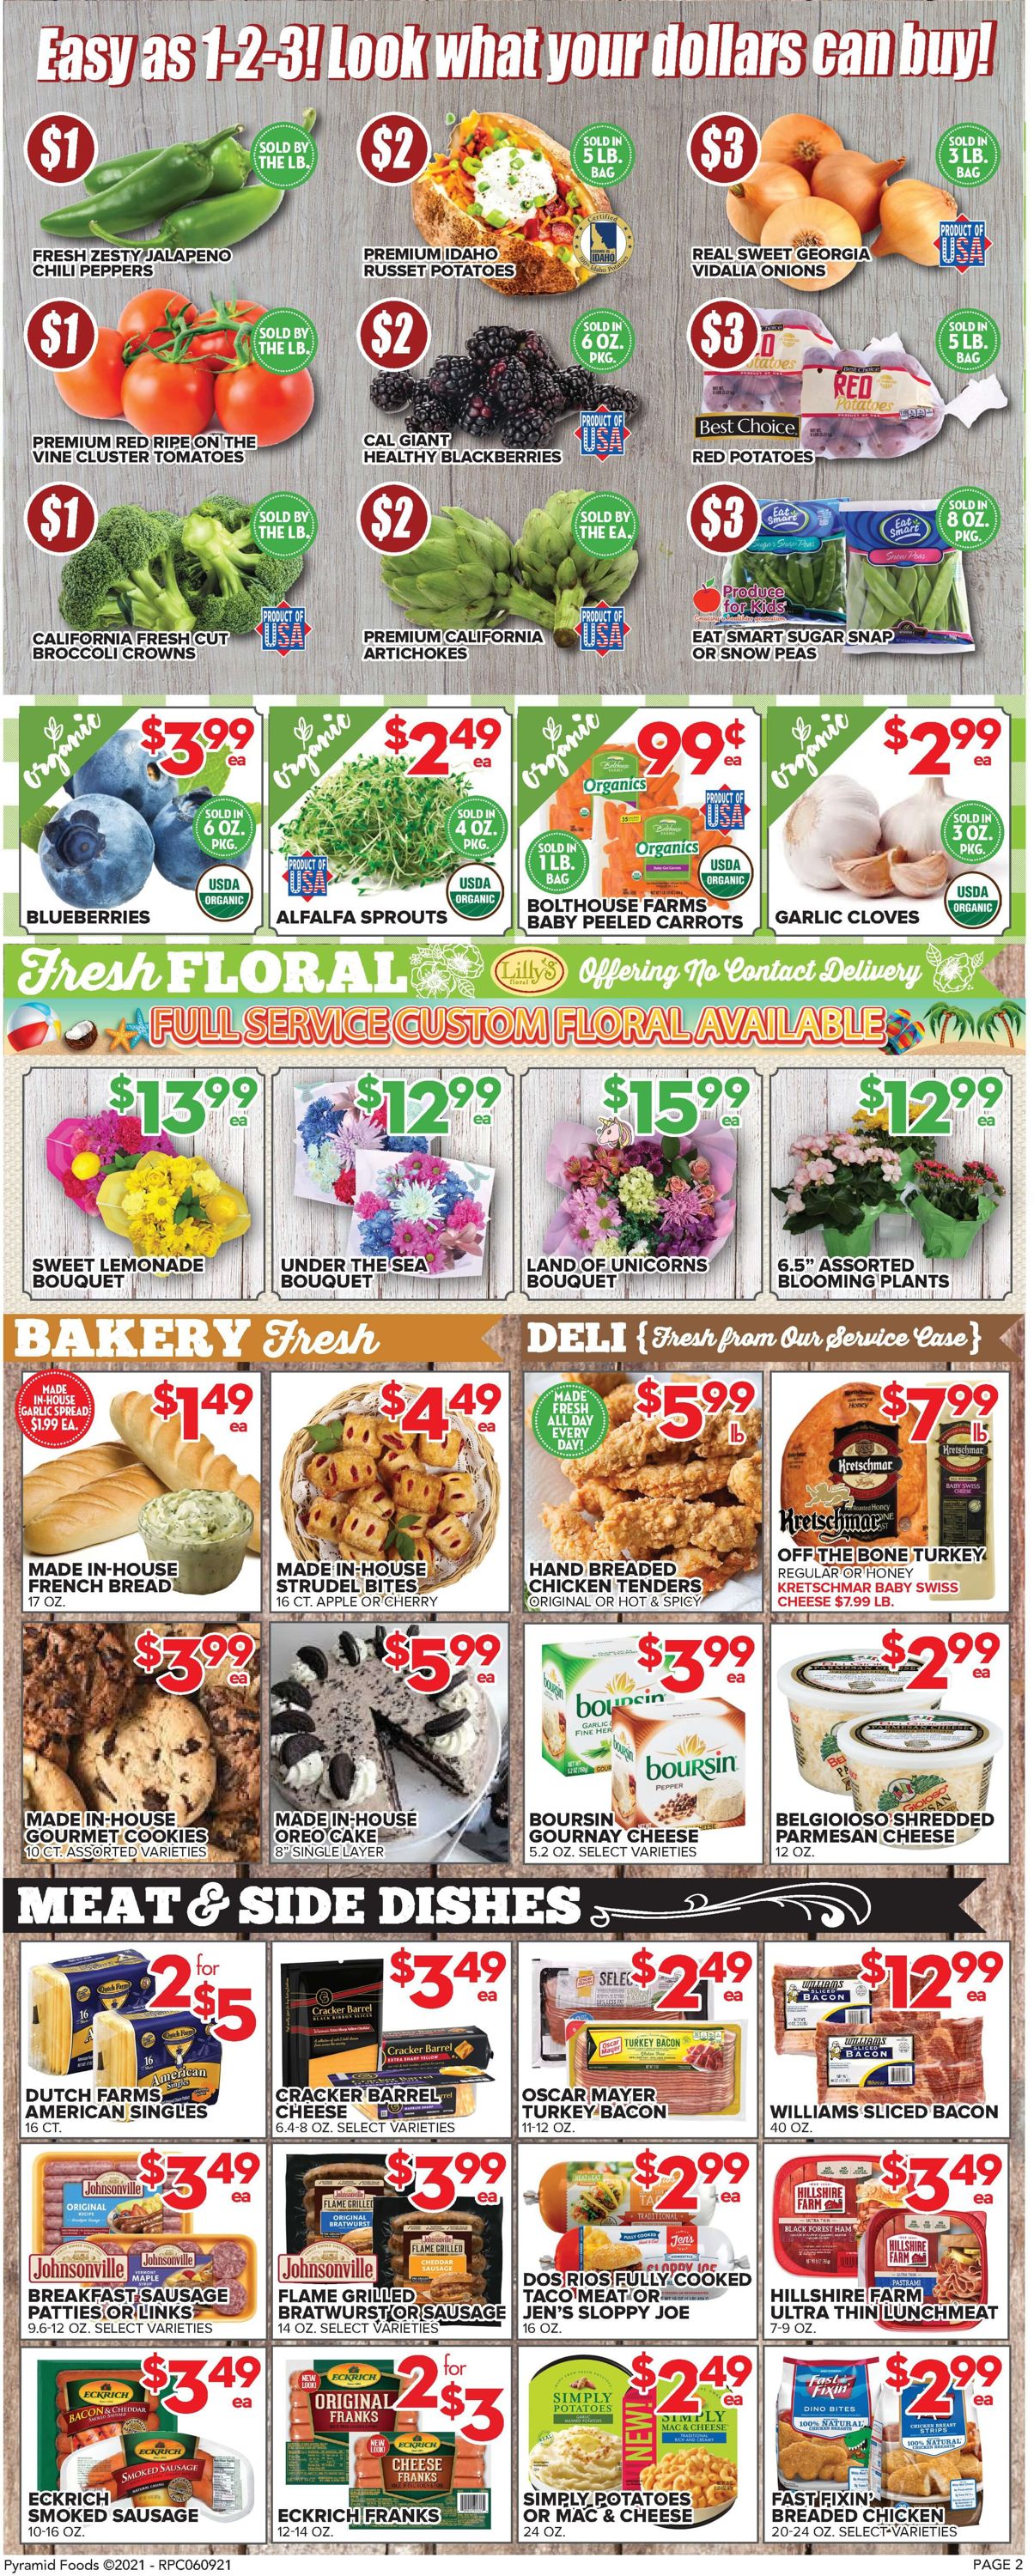 Price Cutter Weekly Ad Circular - valid 06/09-06/15/2021 (Page 2)